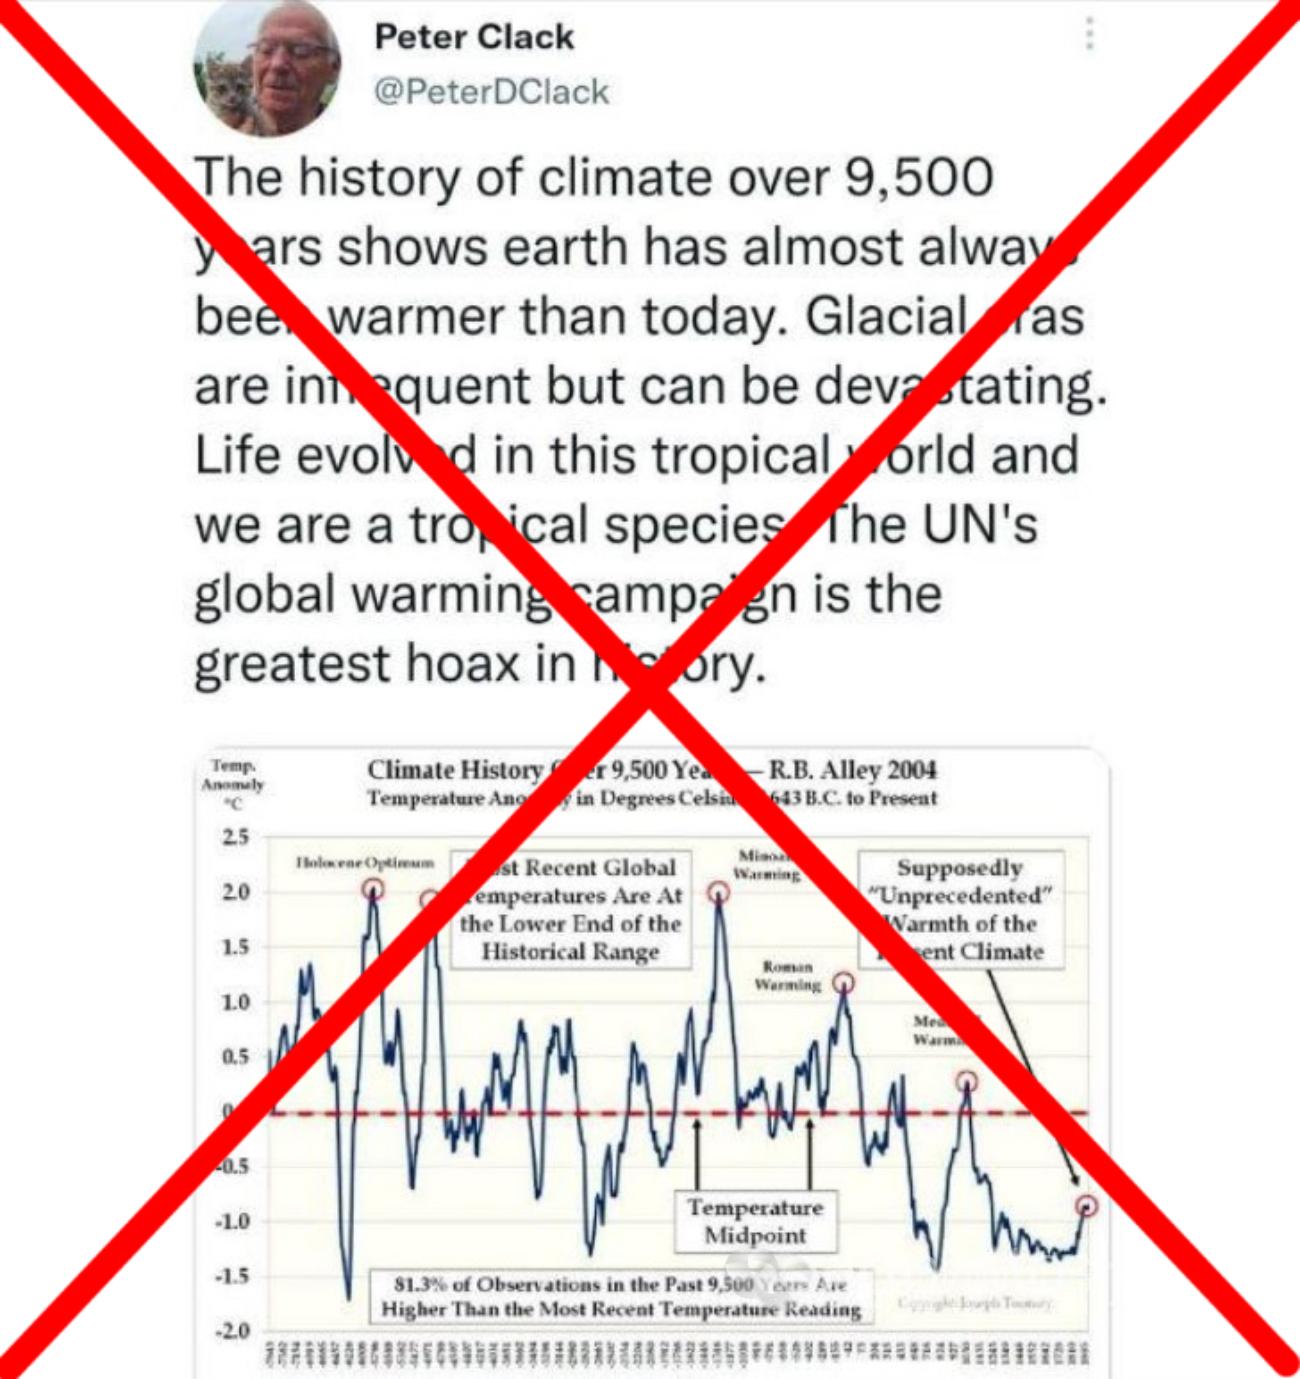 Climate graph used in the tweet